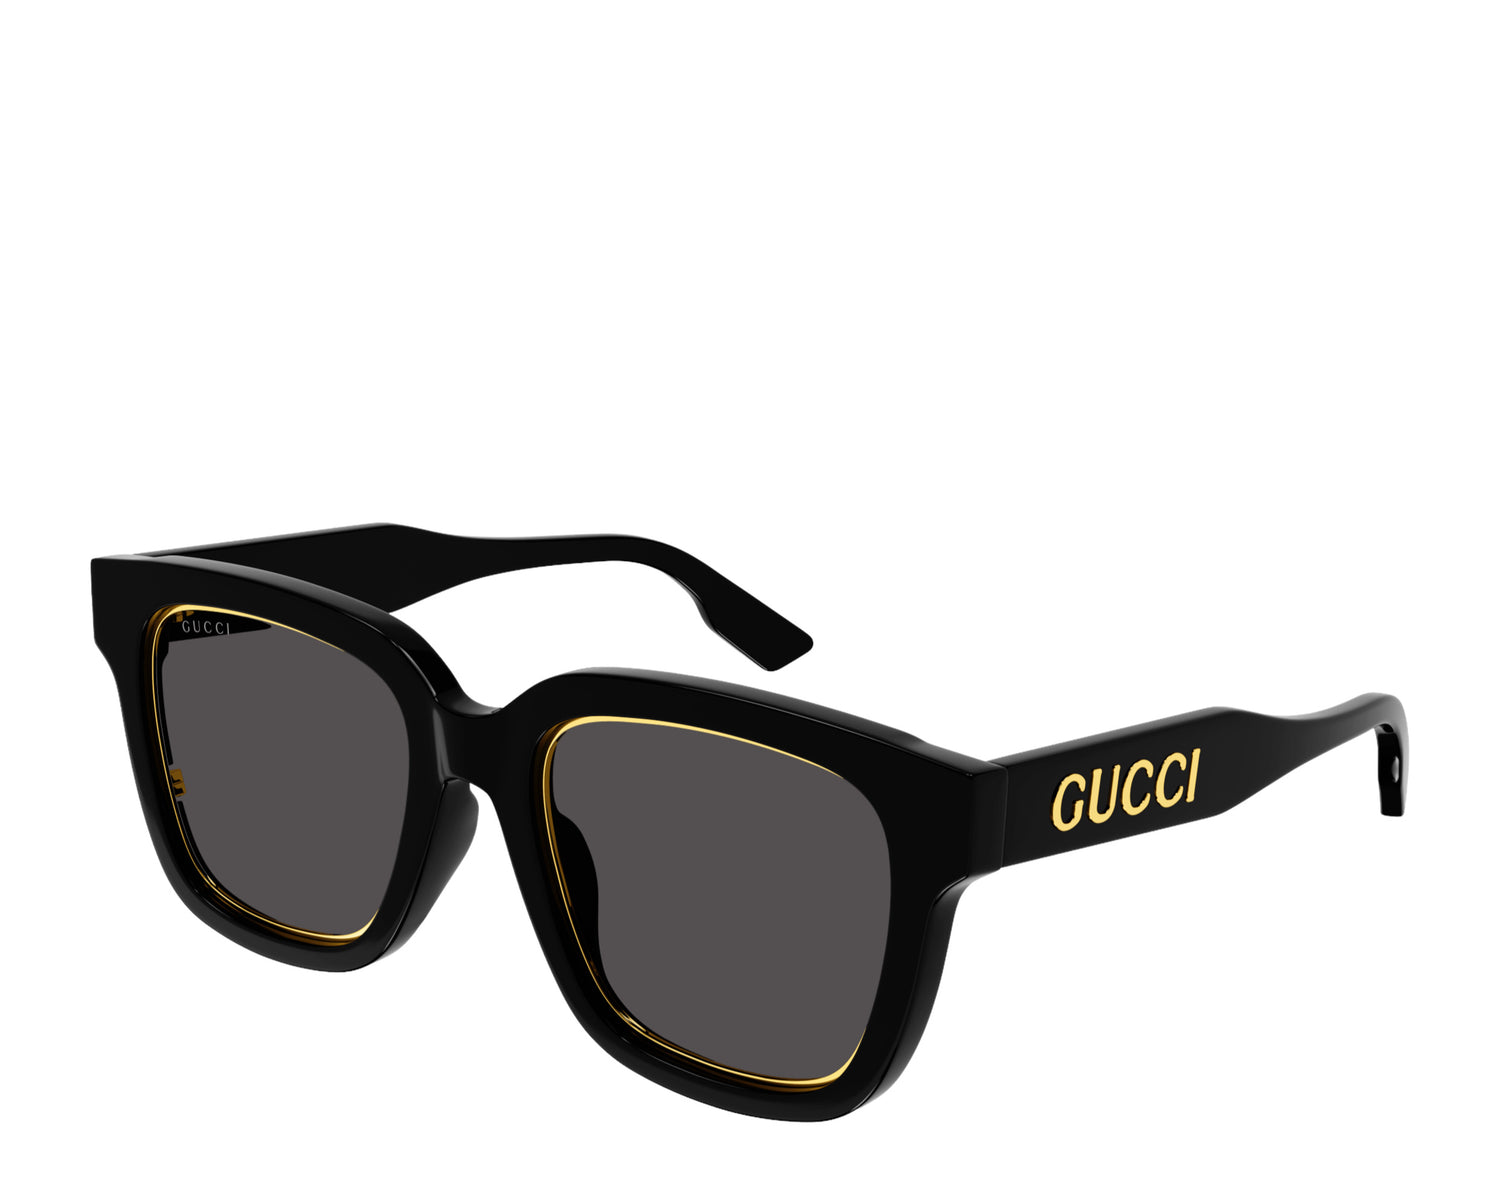 Gucci - Best Sellers